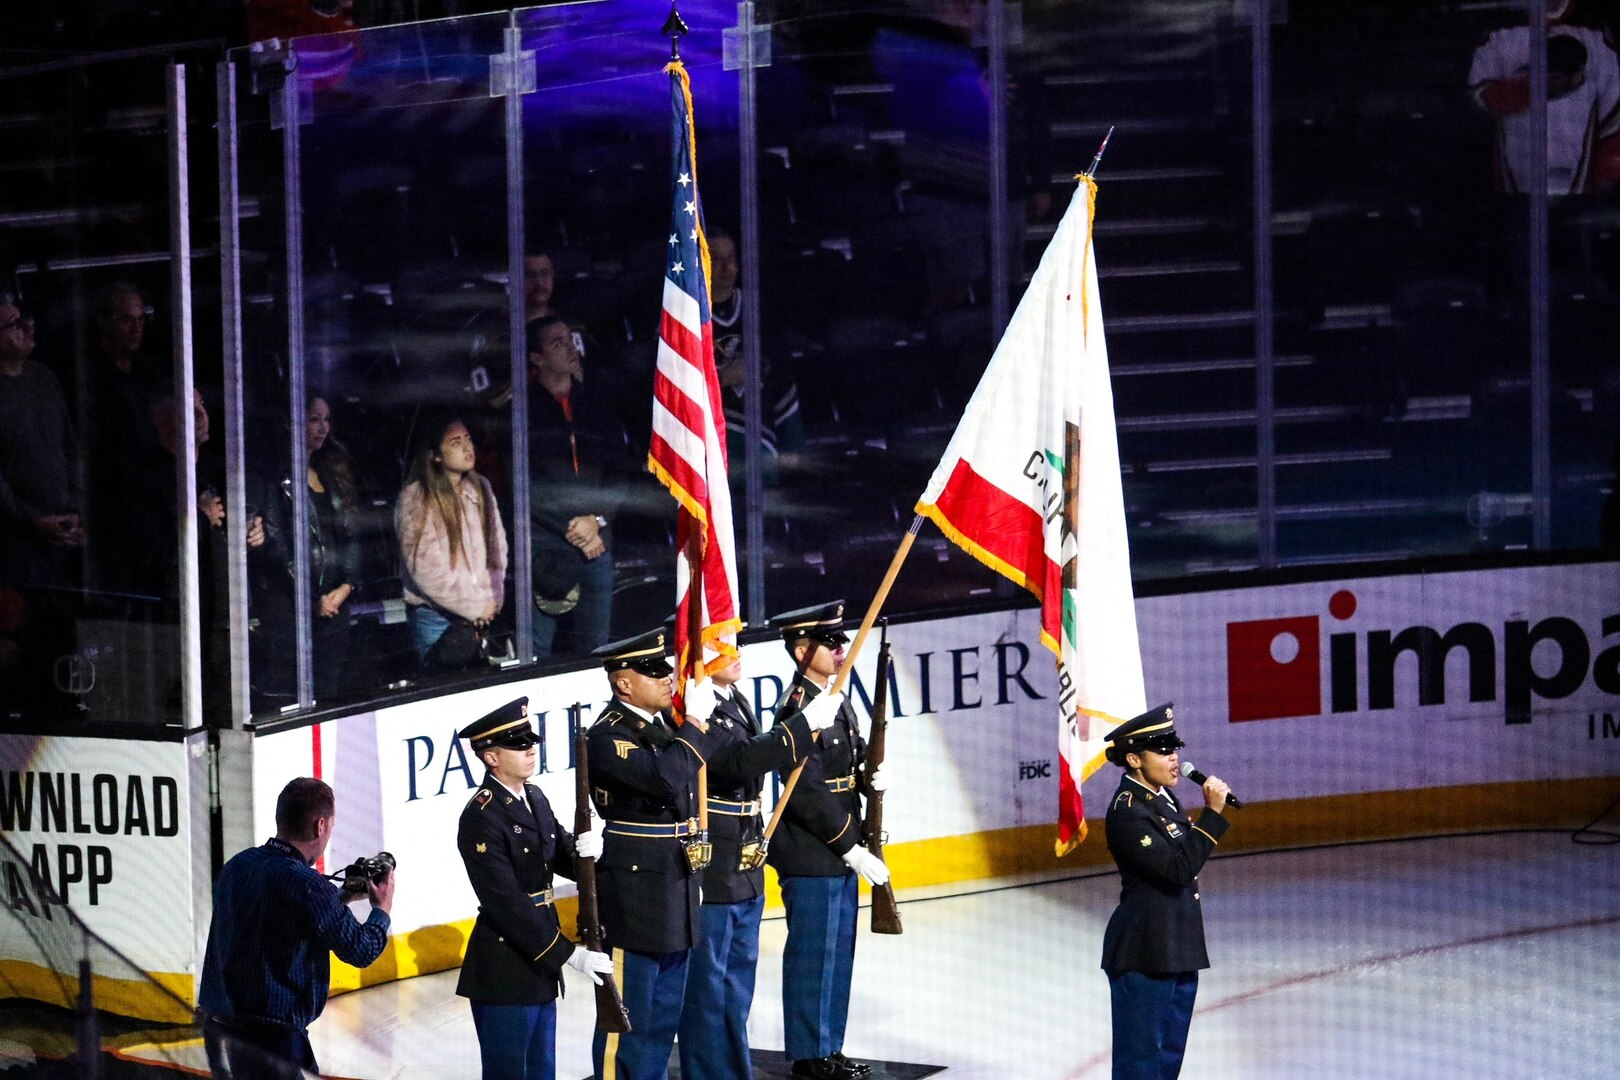 U.S. Army Spc. Raivyn Hearne of the California Army National Guard's 40th Infantry Division Band sings the national anthem during the Anaheim Ducks Military Appreciation Night, Nov. 10, 2019, at the Honda Center in Anaheim, California.